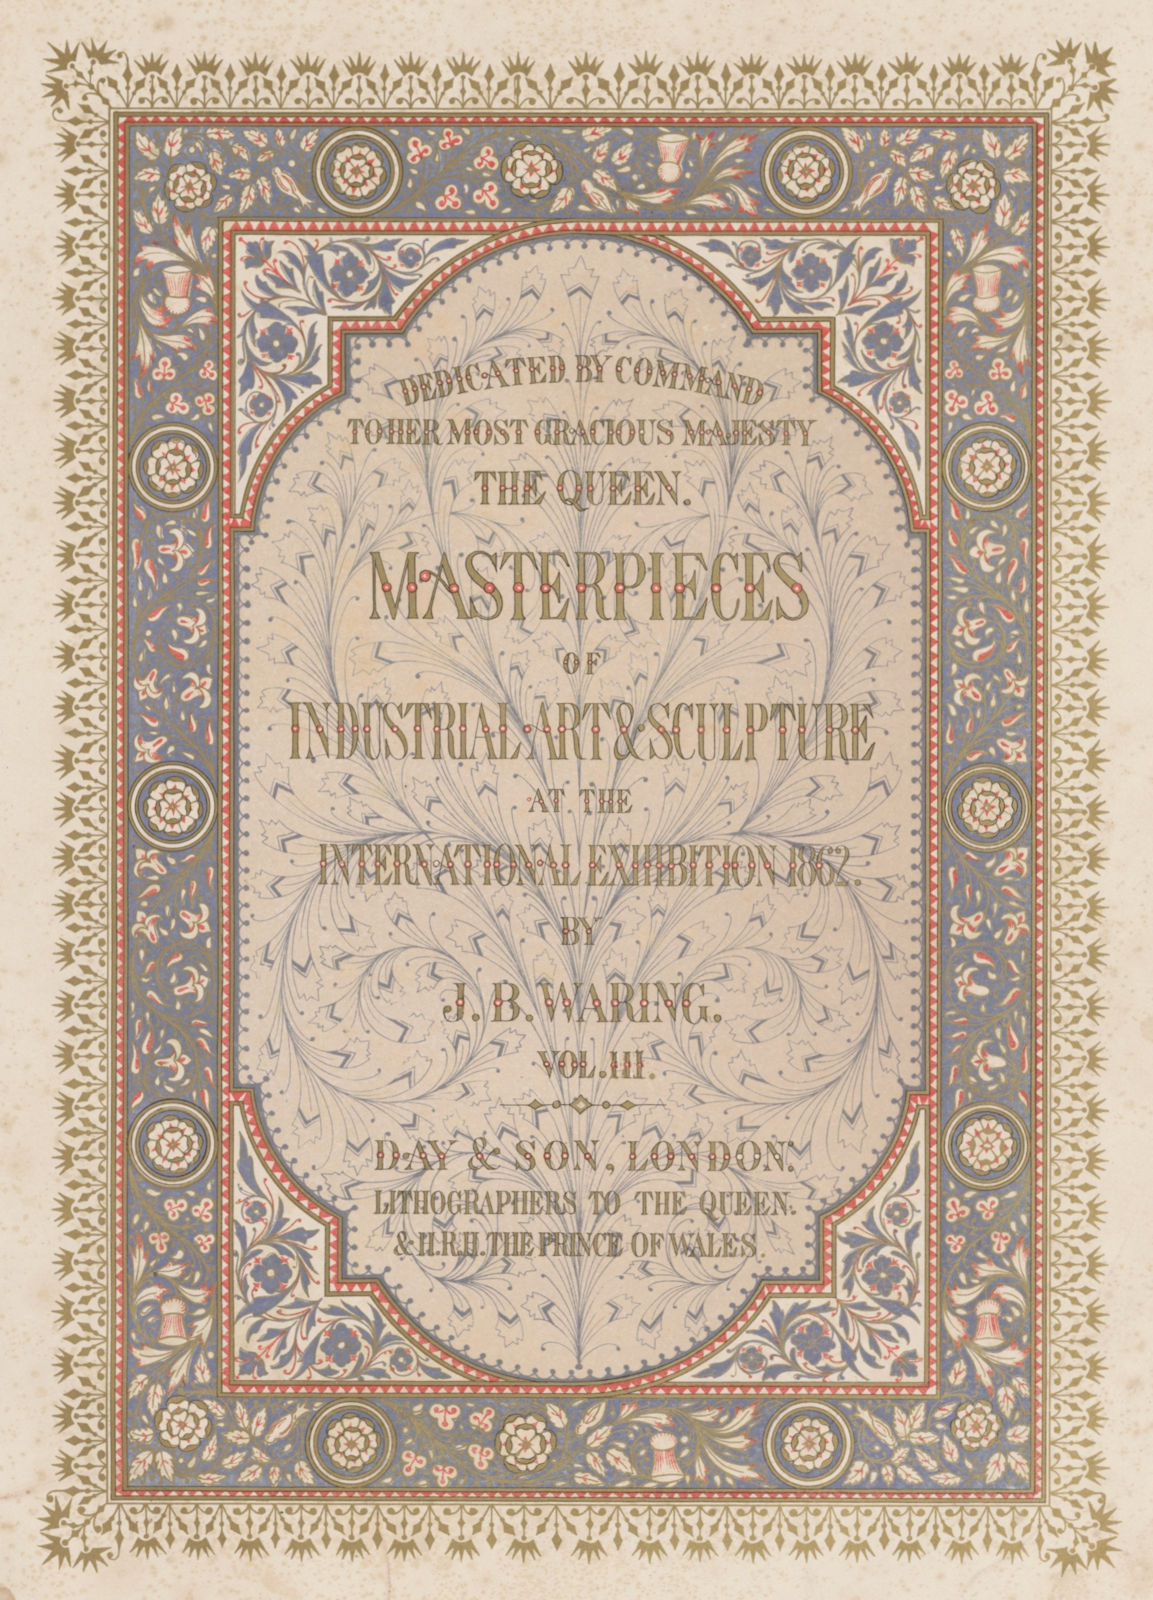 Associate Product Masterpieces of Industrial Art International Exhibition Frontispiece Waring 1862